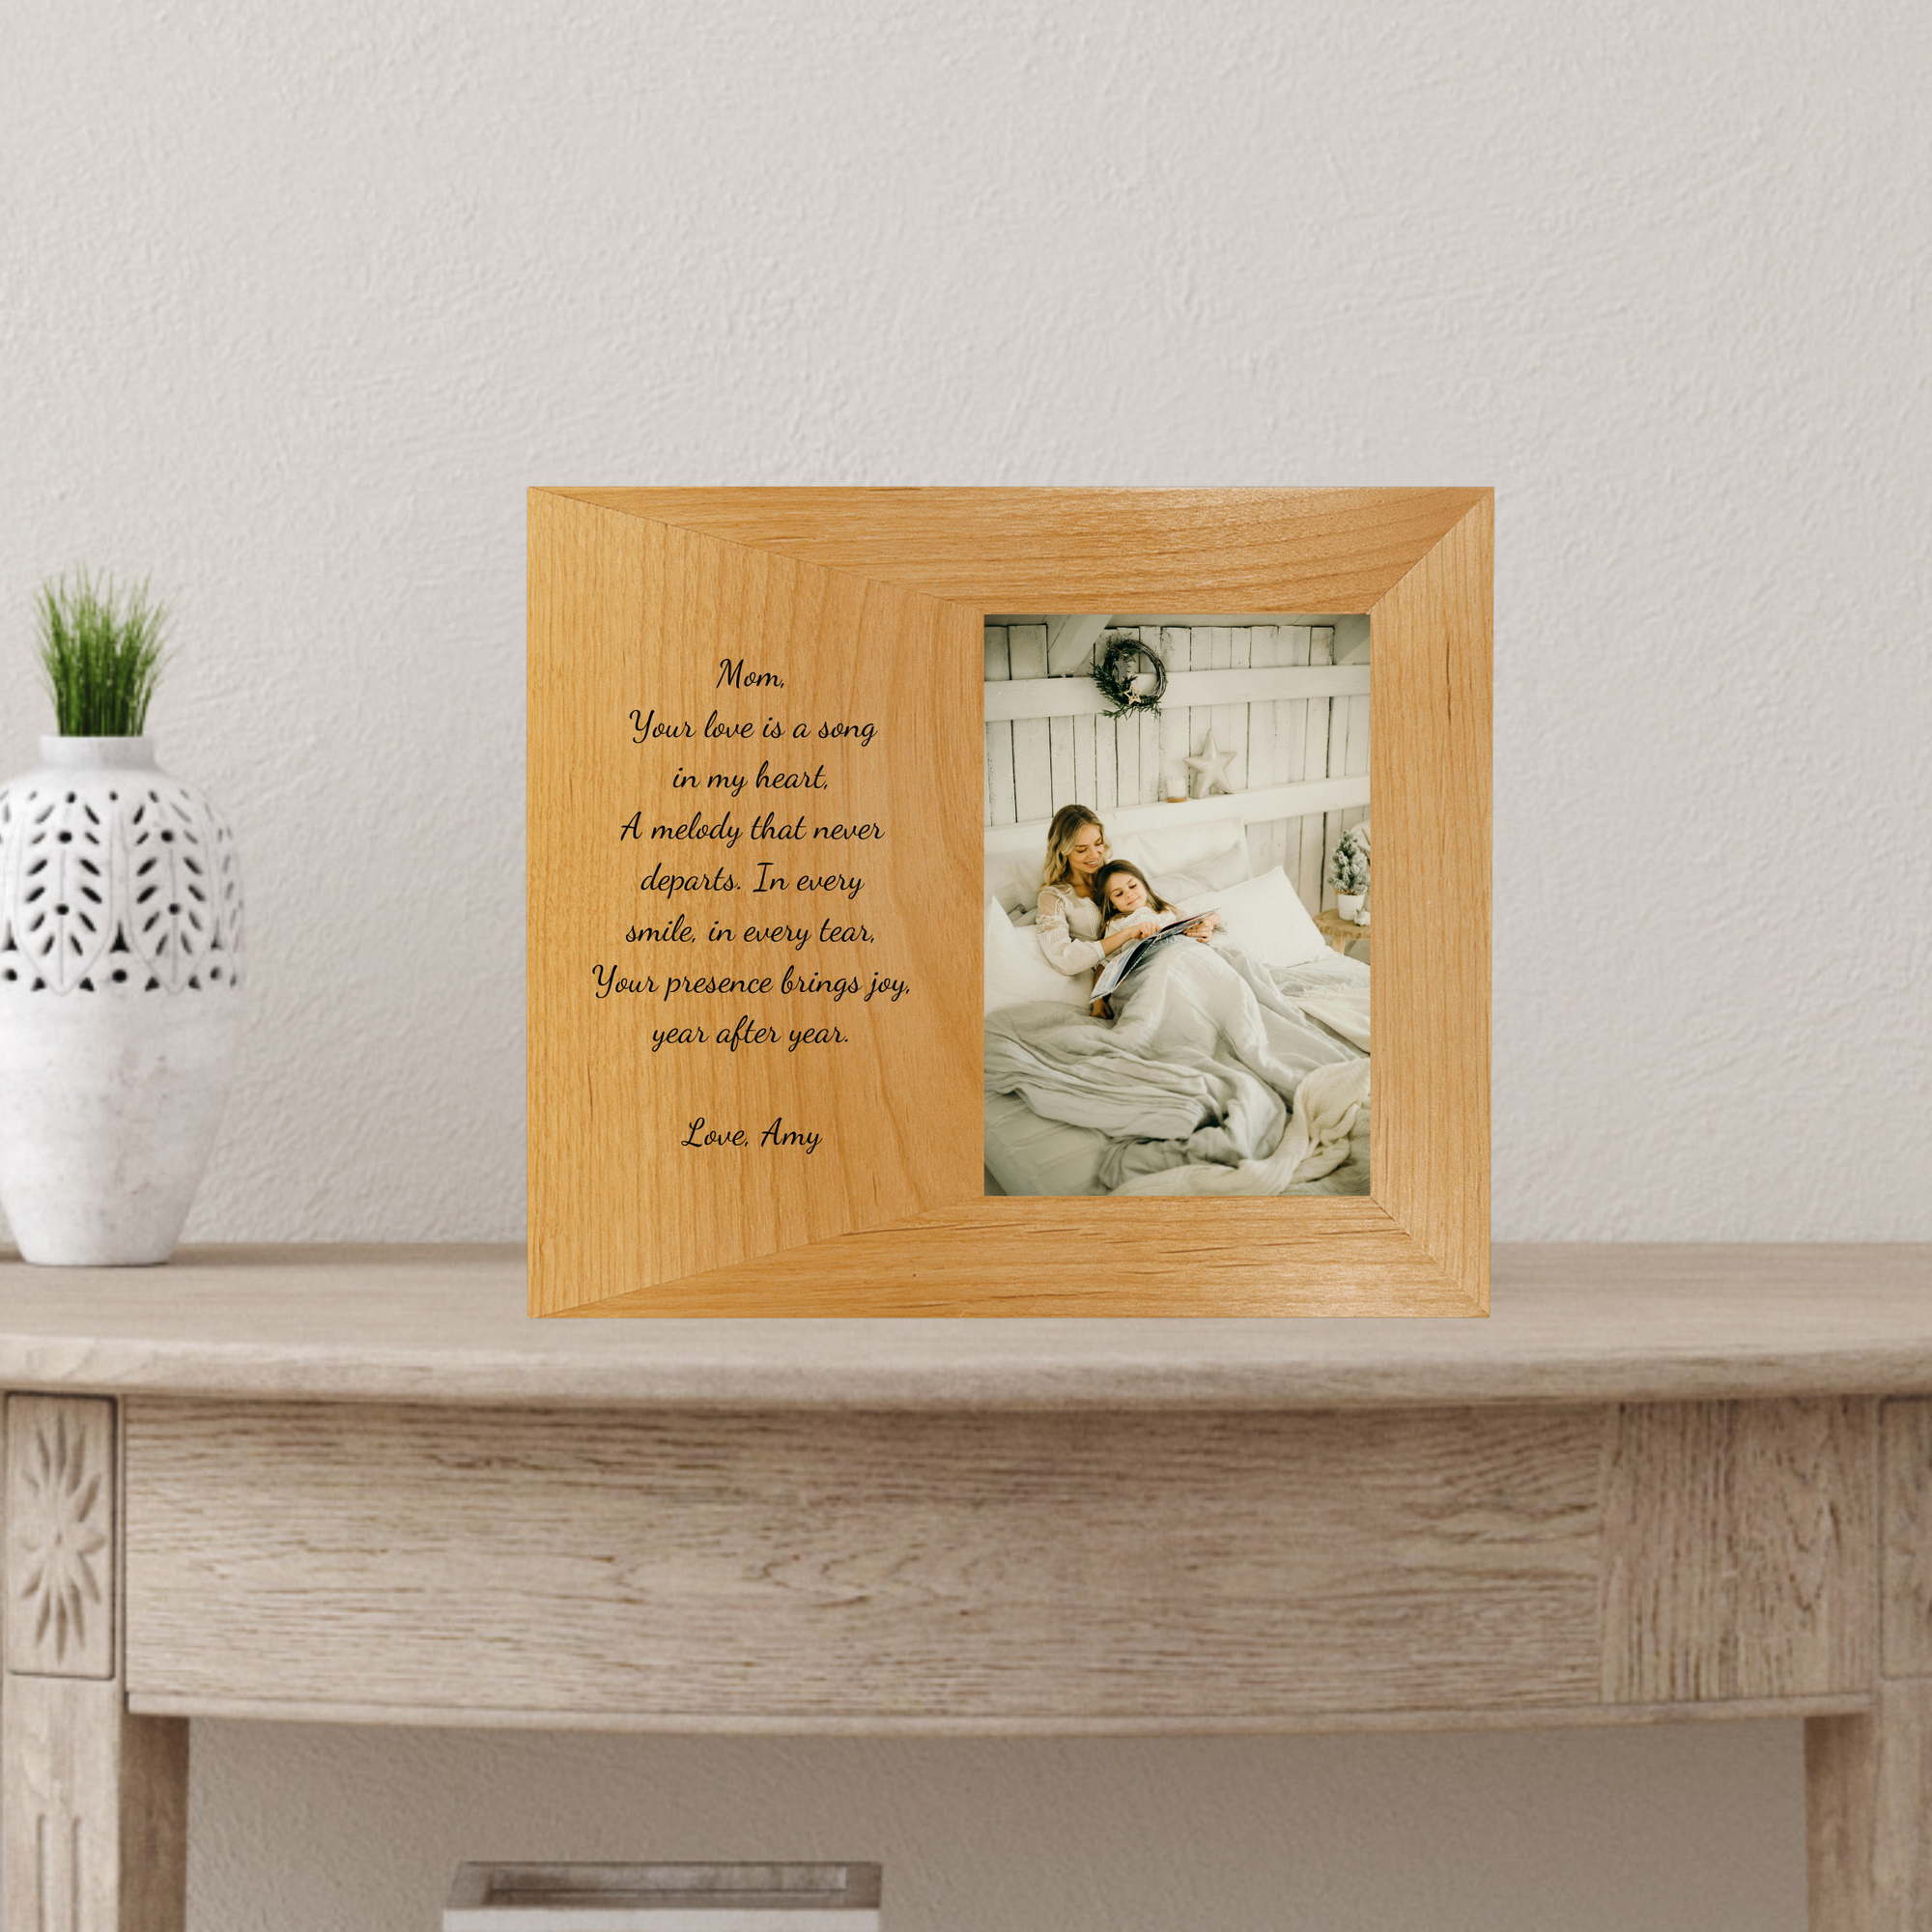 Memories Etched in Wood Frame